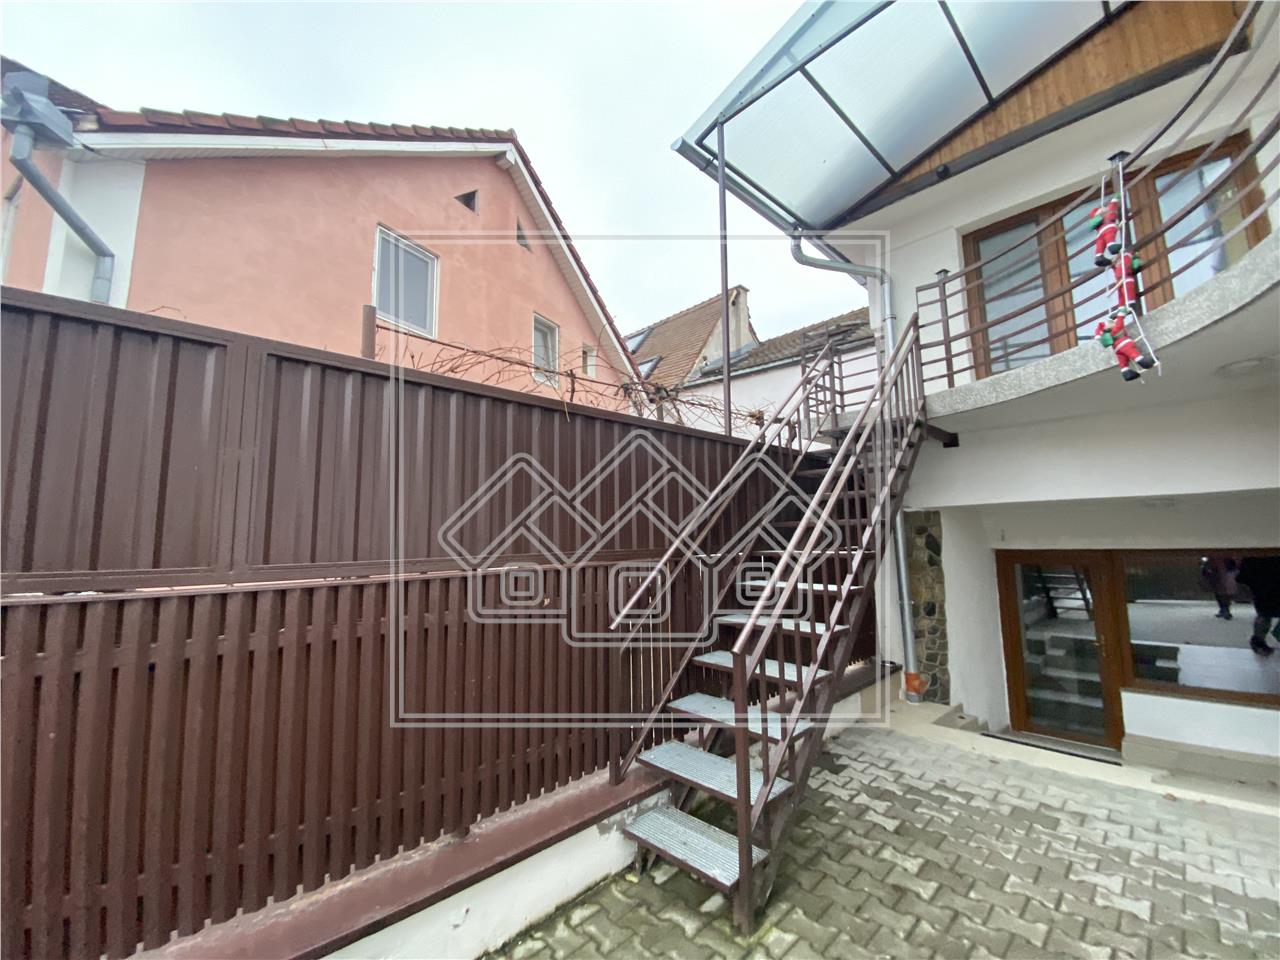 Apartment for rent in Sibiu - Milea area - new - turnkey delivery